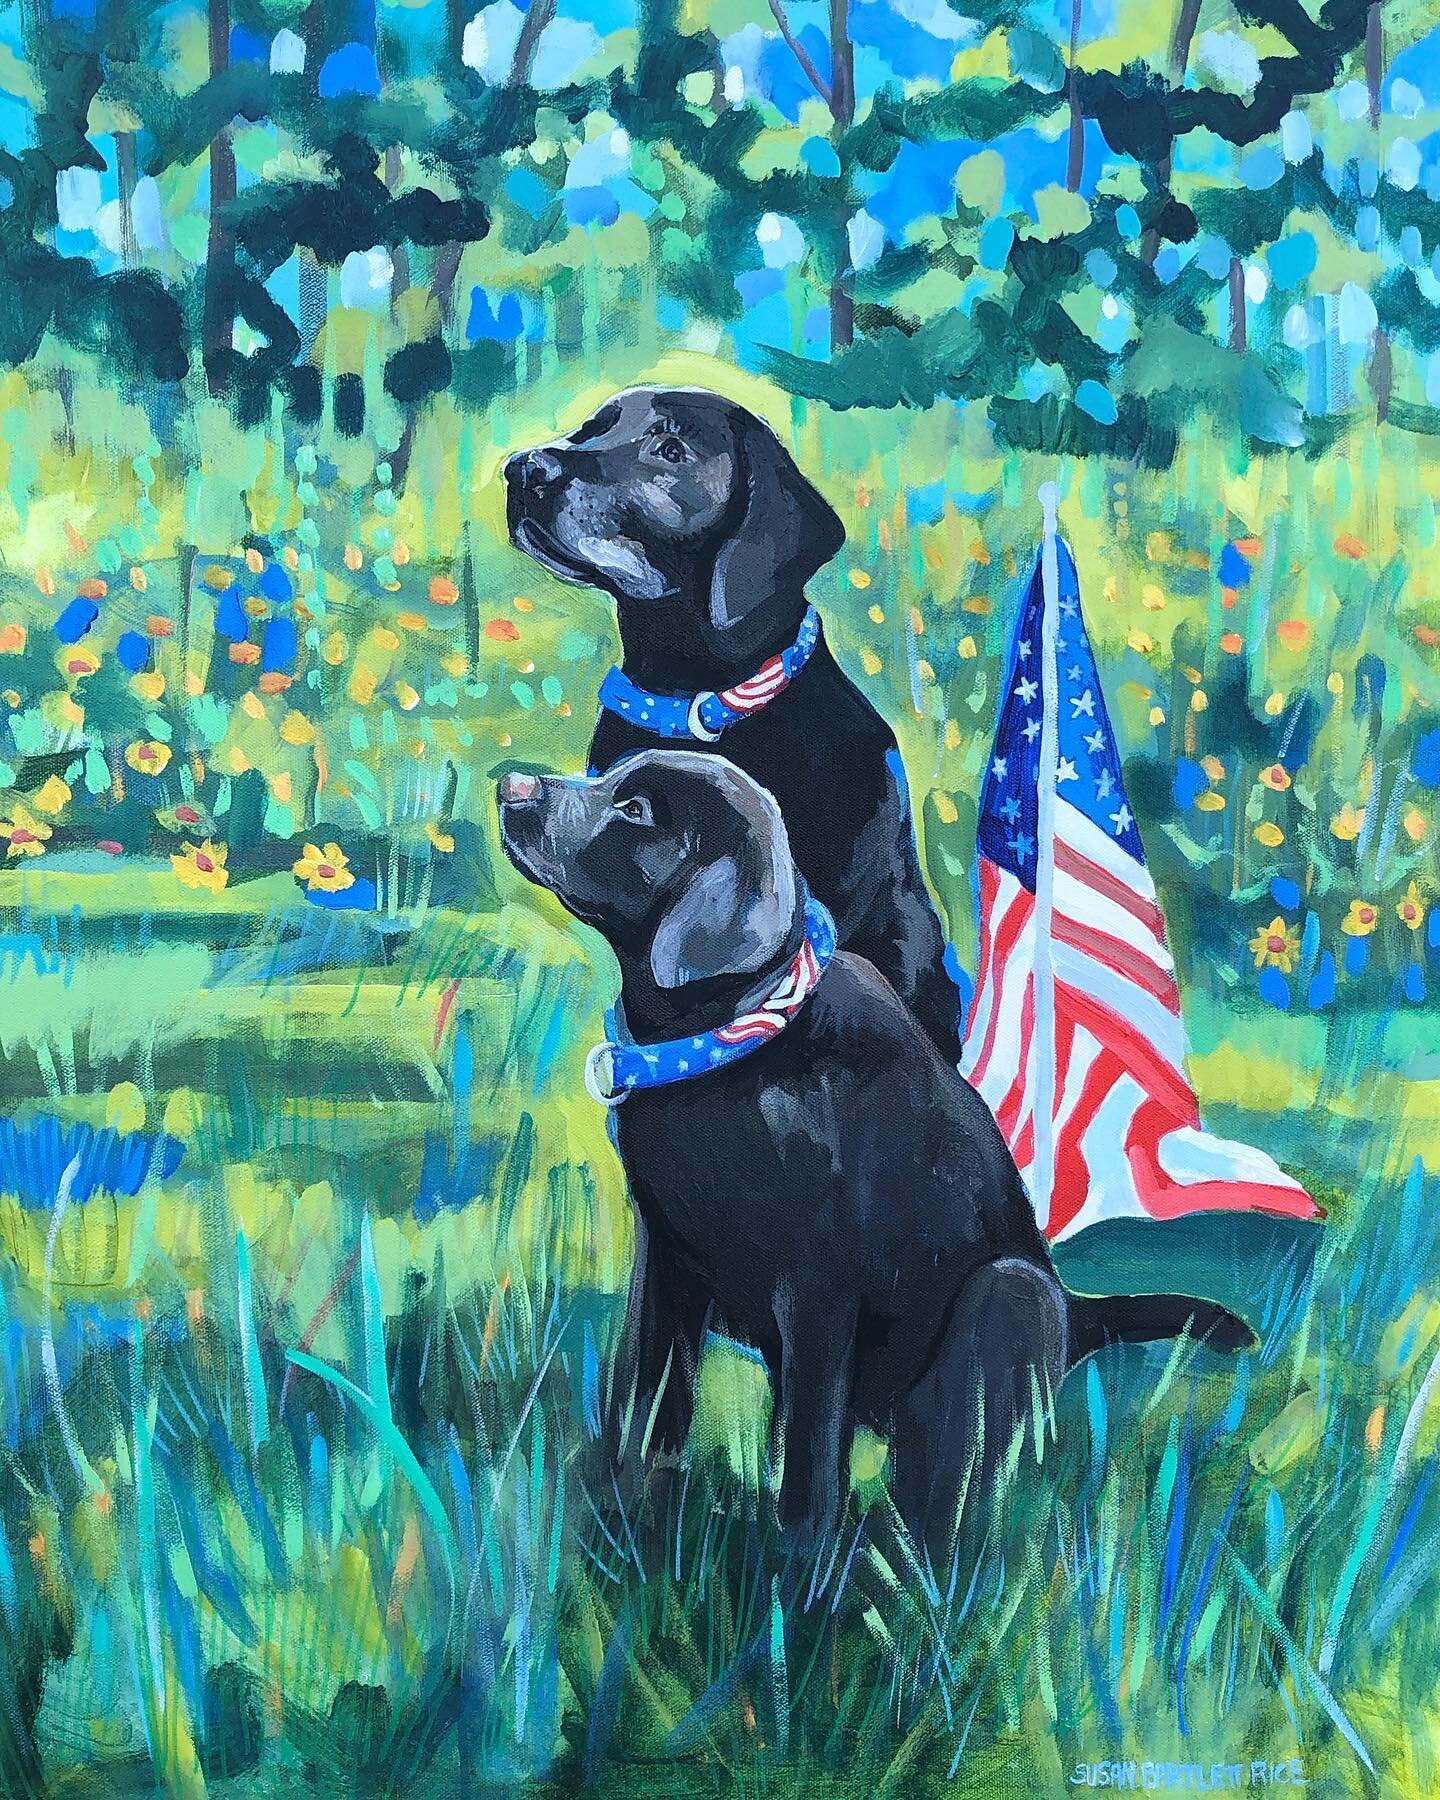 Happy 4th of July! 🇺🇸
.
Susan Bartlett Rice
24x30
Acrylic on Canvas
2022
sold*
.
#blacklab #blacklabsofinstagram 
#Artist #Maine #Maineartist #mainelife #maineart #mainepaintings #NewEngland #Maineart #localmaineart #Maineinteriors #lovemaine #midc